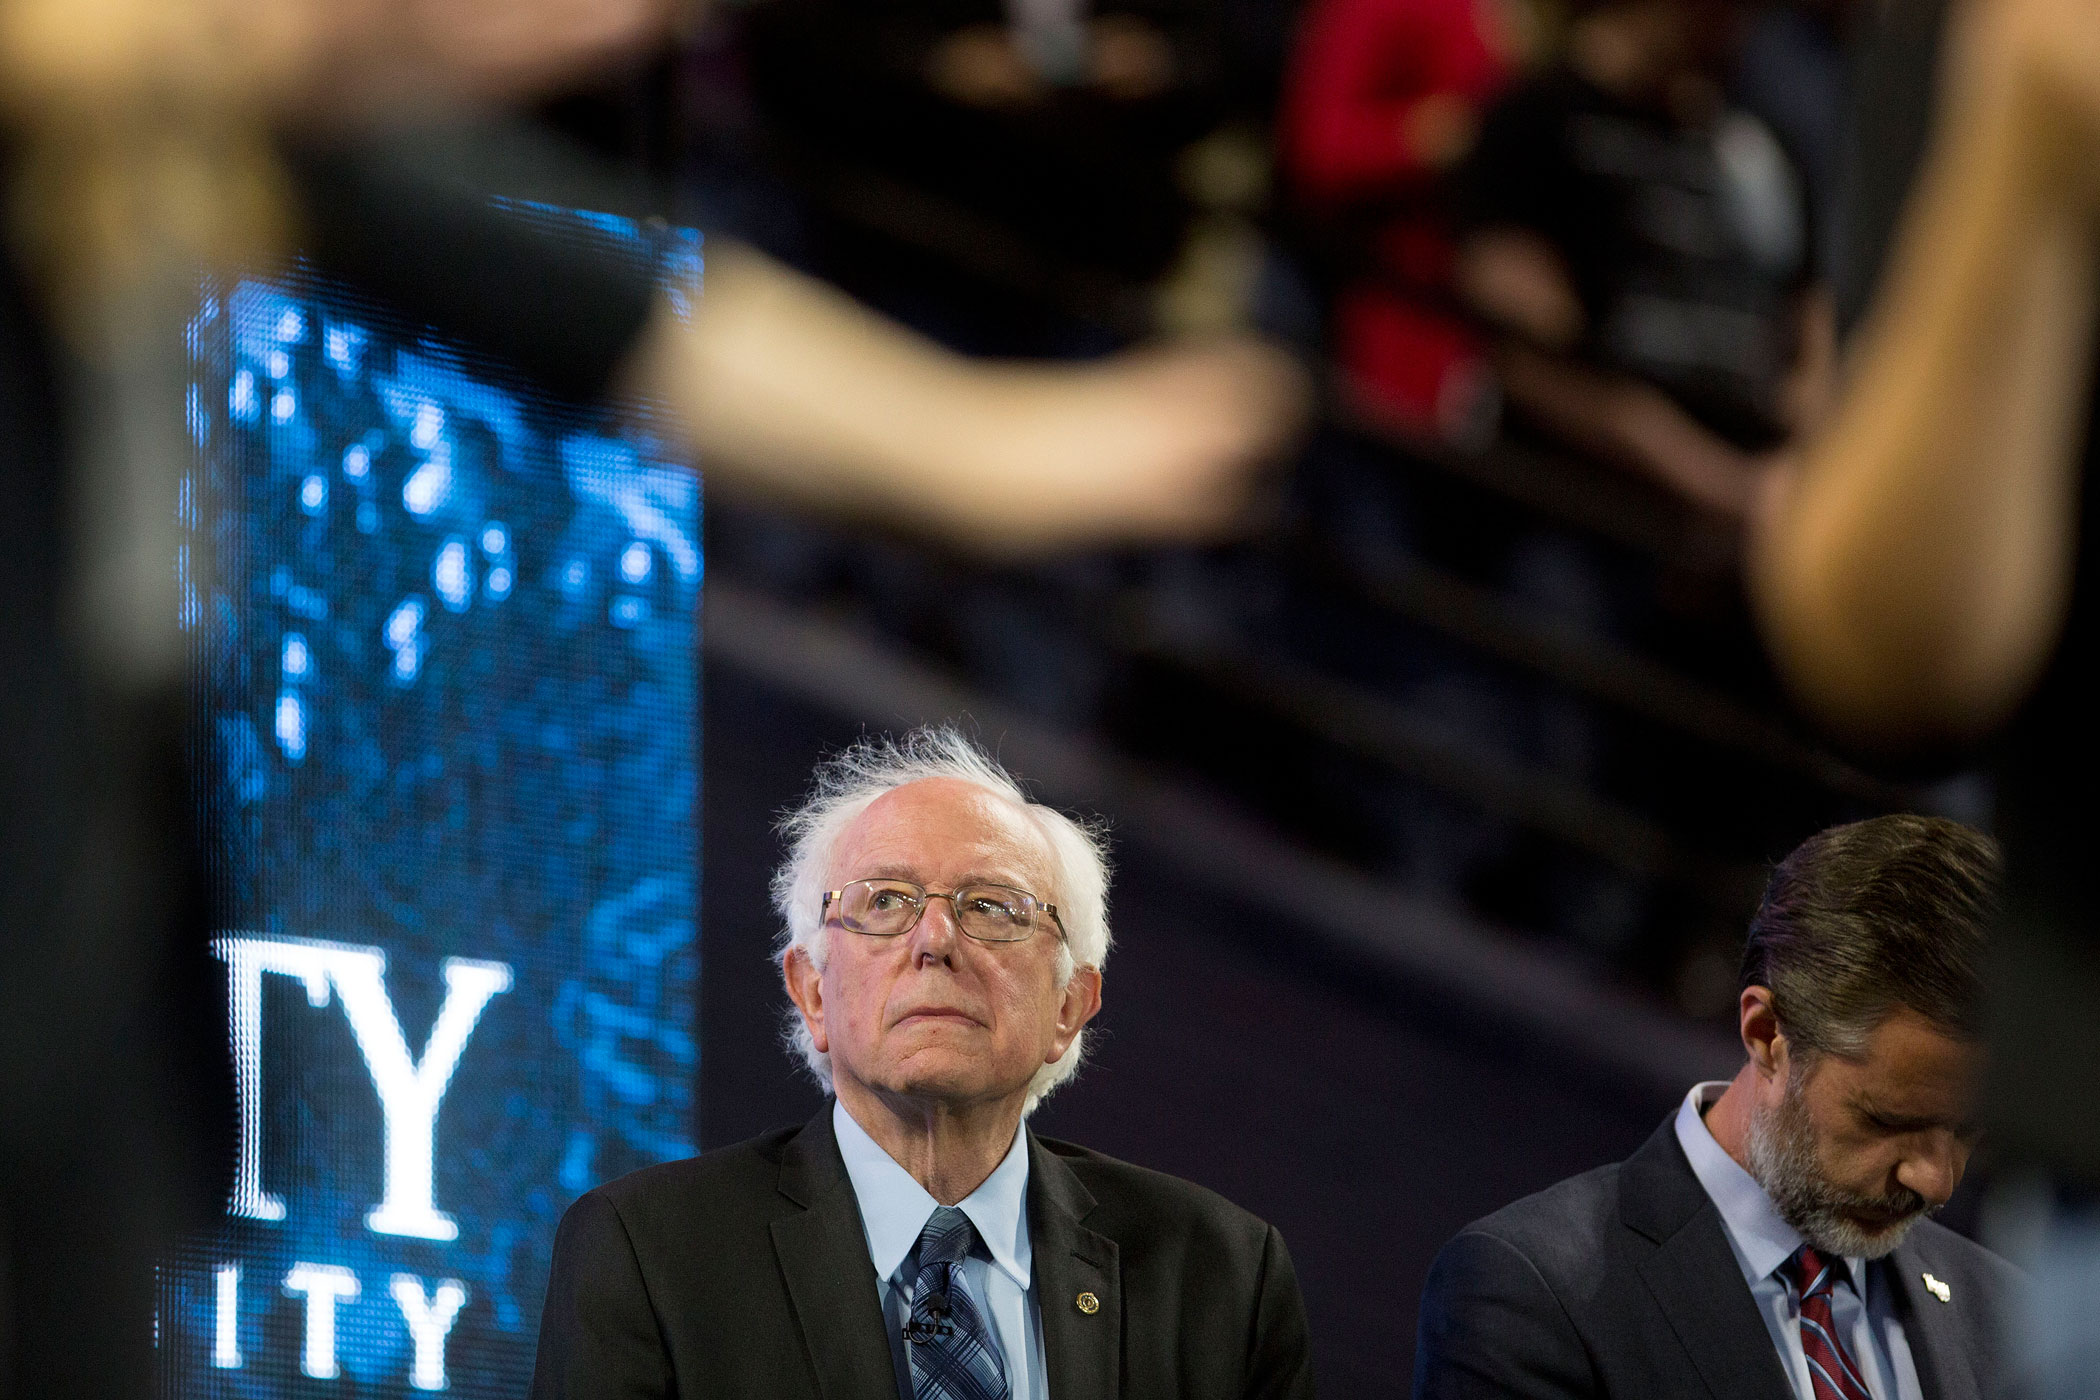 Senator Bernie Sanders, an independent from Vermont and 2016 Democratic presidential candidate, left, and Jerry Falwell Jr., president of Liberty University, listen to a prayer during a Liberty University Convocation in Lynchburg, Virginia, U.S., on Monday, Sept. 14, 2015. Sanders now leads his Democratic rival former secretary of state Hillary Clinton by double digits in Iowa and New Hampshire, the first two states in where votes will be cast in 2016 to decide the party's presidential nominee. Photographer: Andrew Harrer/Bloomberg via Getty Images